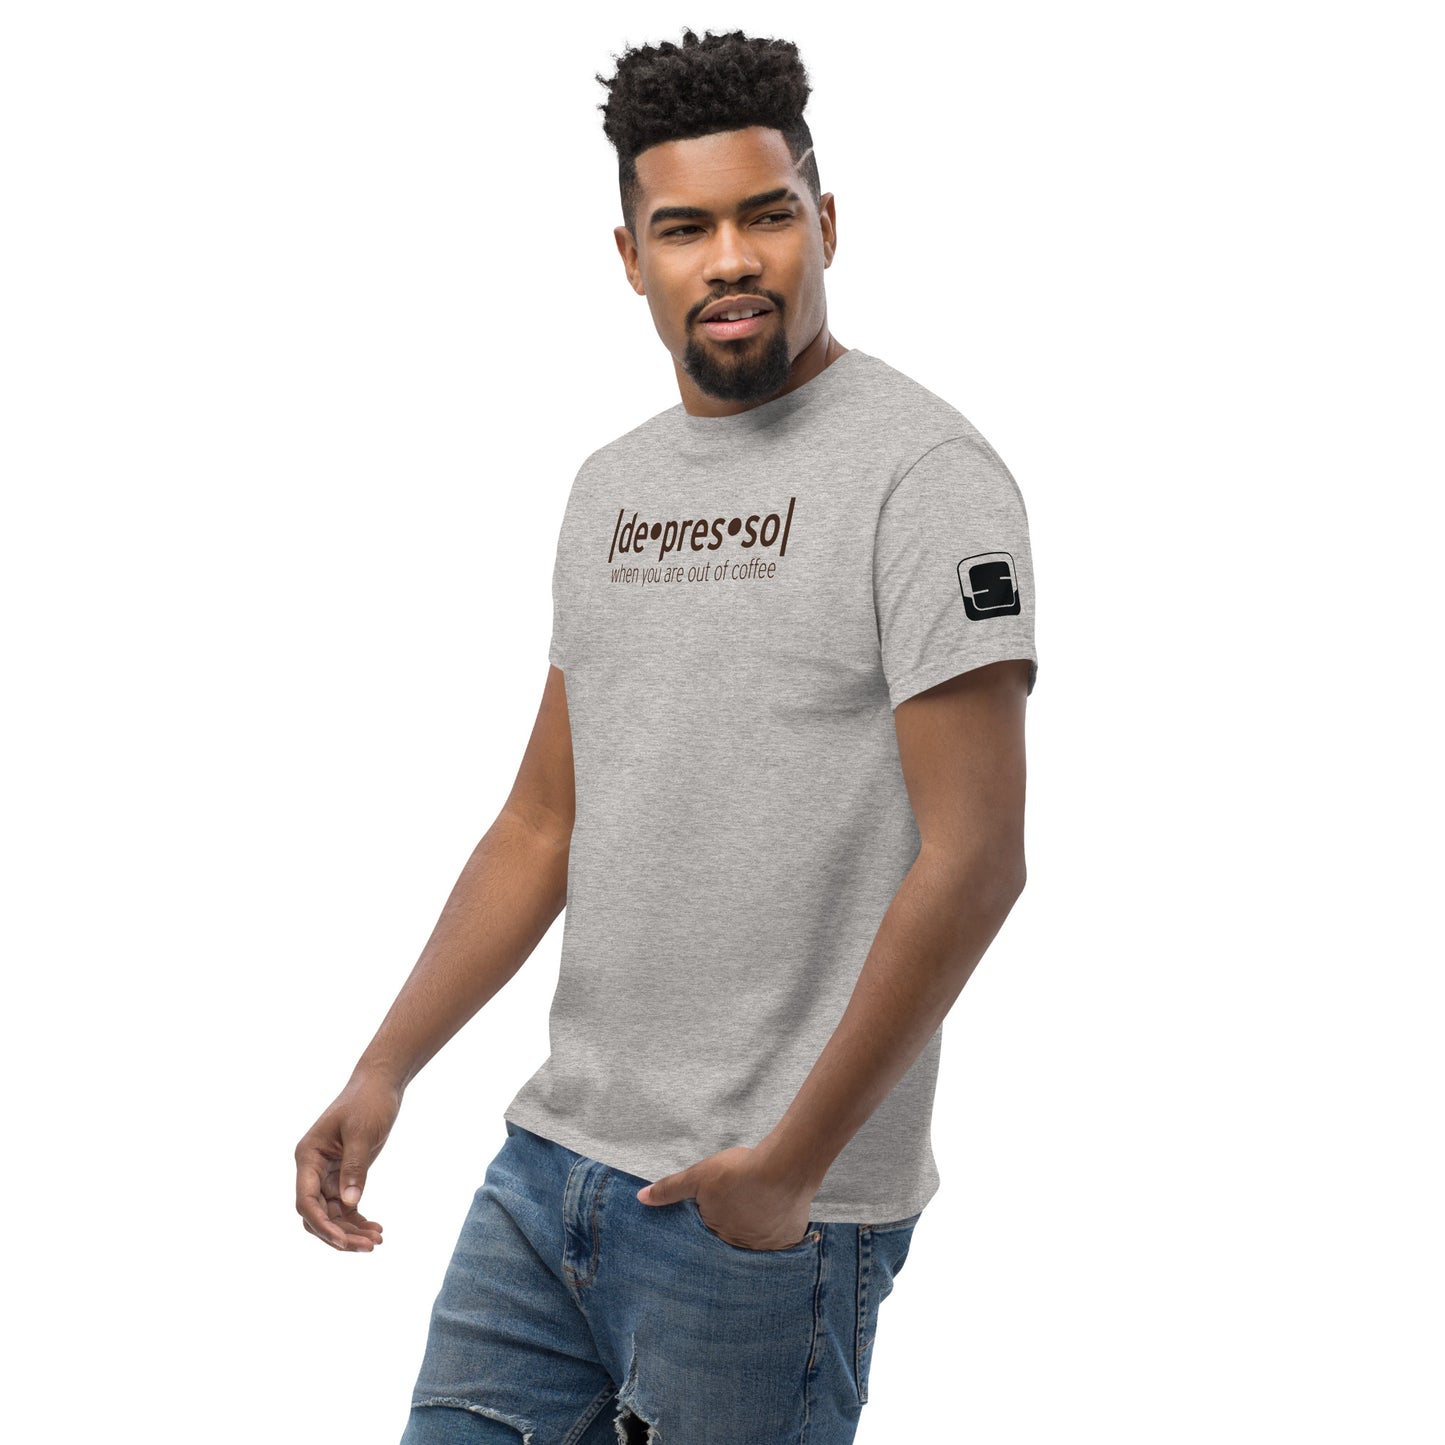 Charming man with a beard, wearing a heather grey t-shirt with the playful words 'depresso' and 'when you are out of coffee' in brown script, a small logo patch on the sleeve, casually posing against a white background